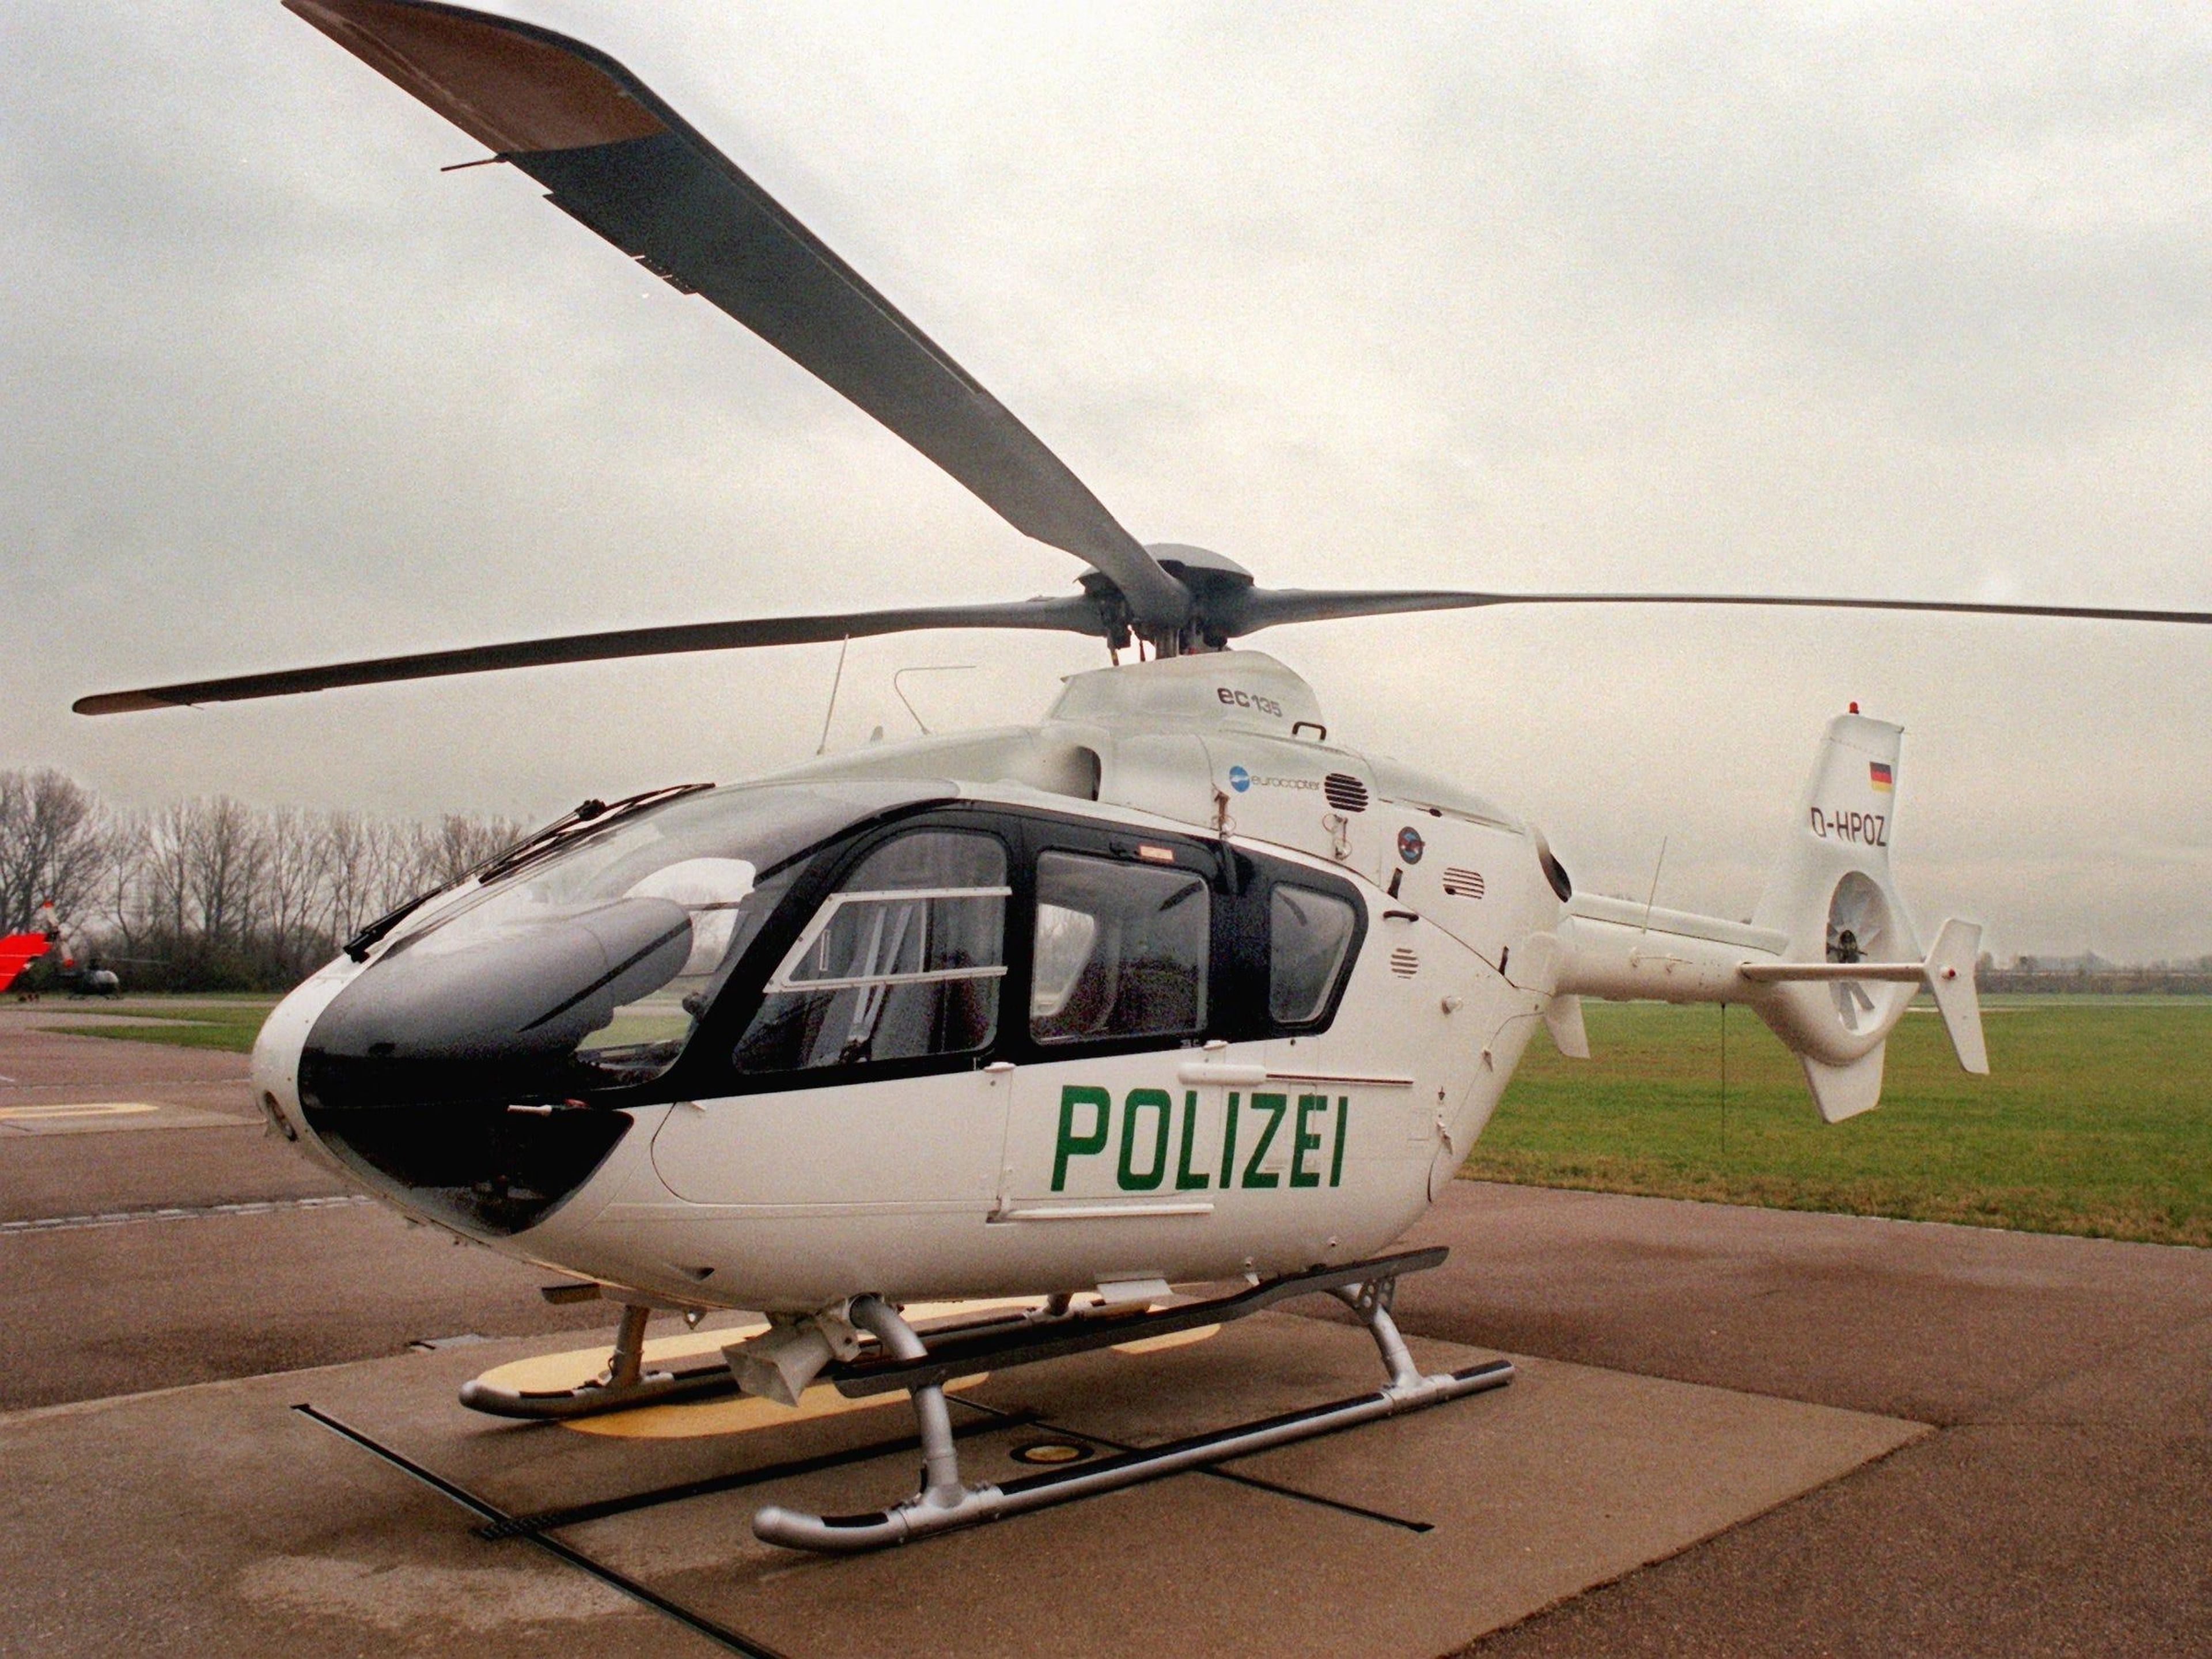 Here's a traditional Airbus H135 helicopter, which has strong design similarities to the eVTOL.